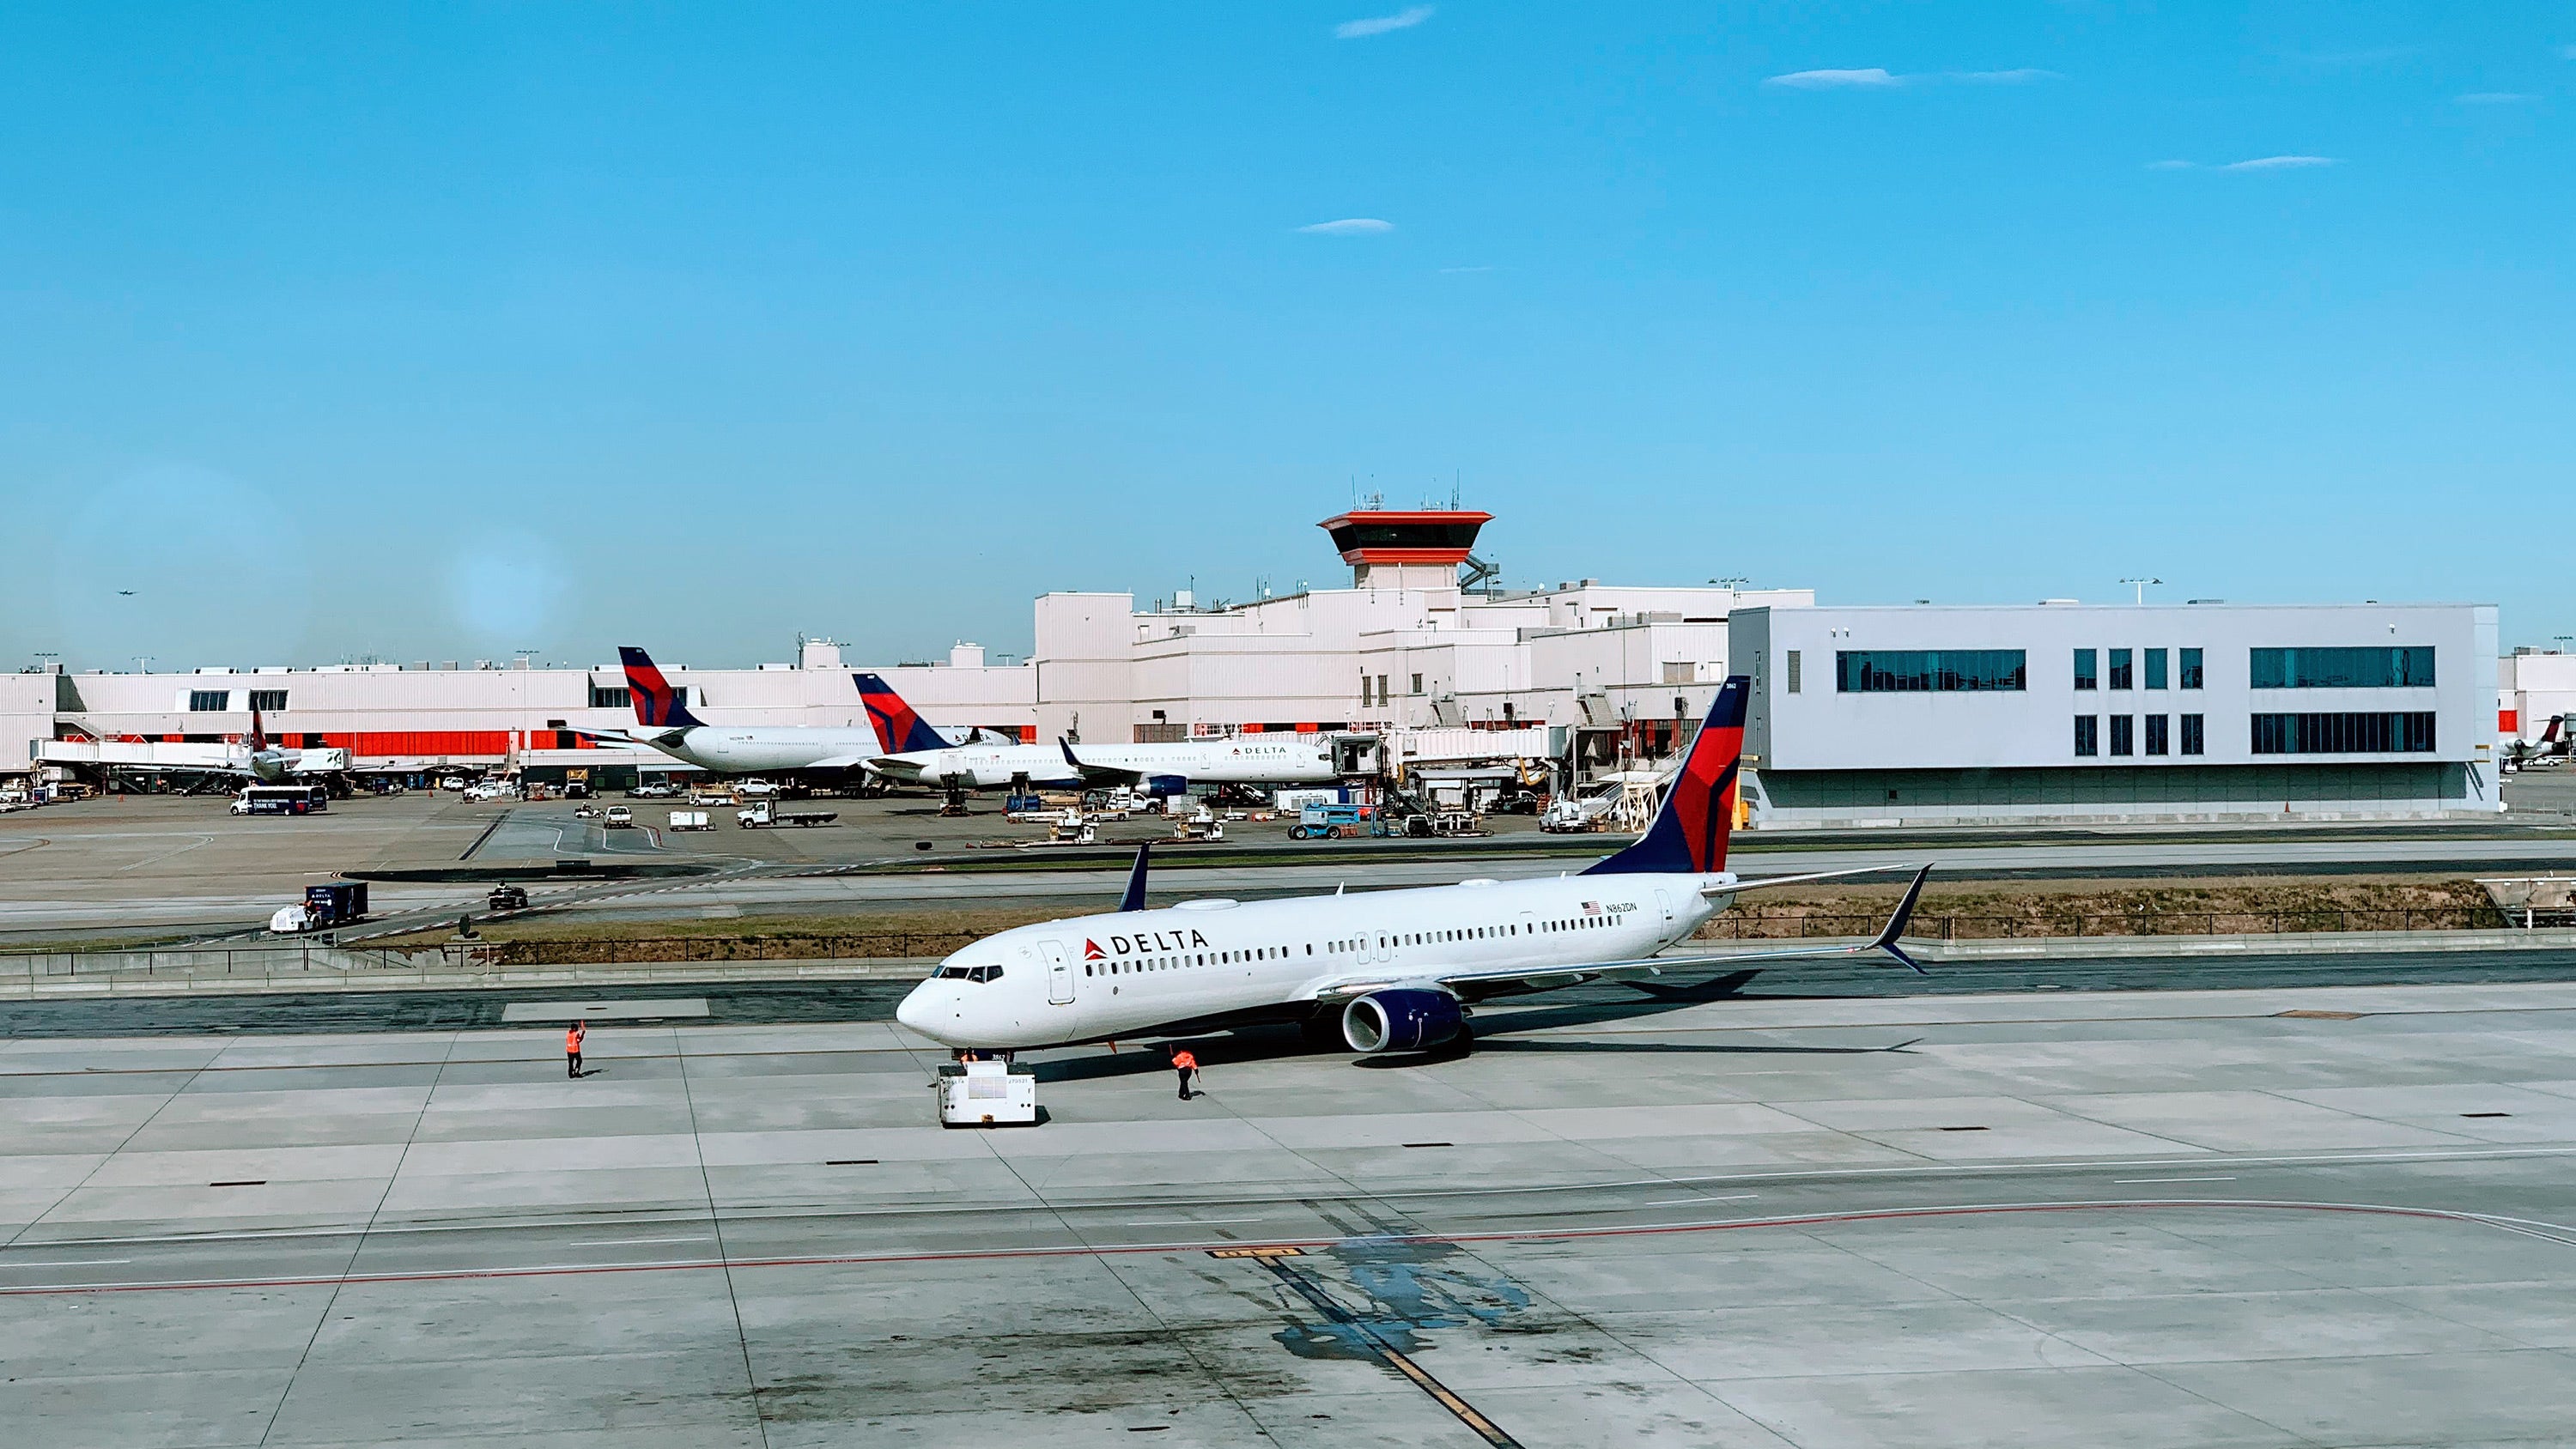 Extended: This Amazing Delta Promo Just Doubled the Value of Your SkyMiles